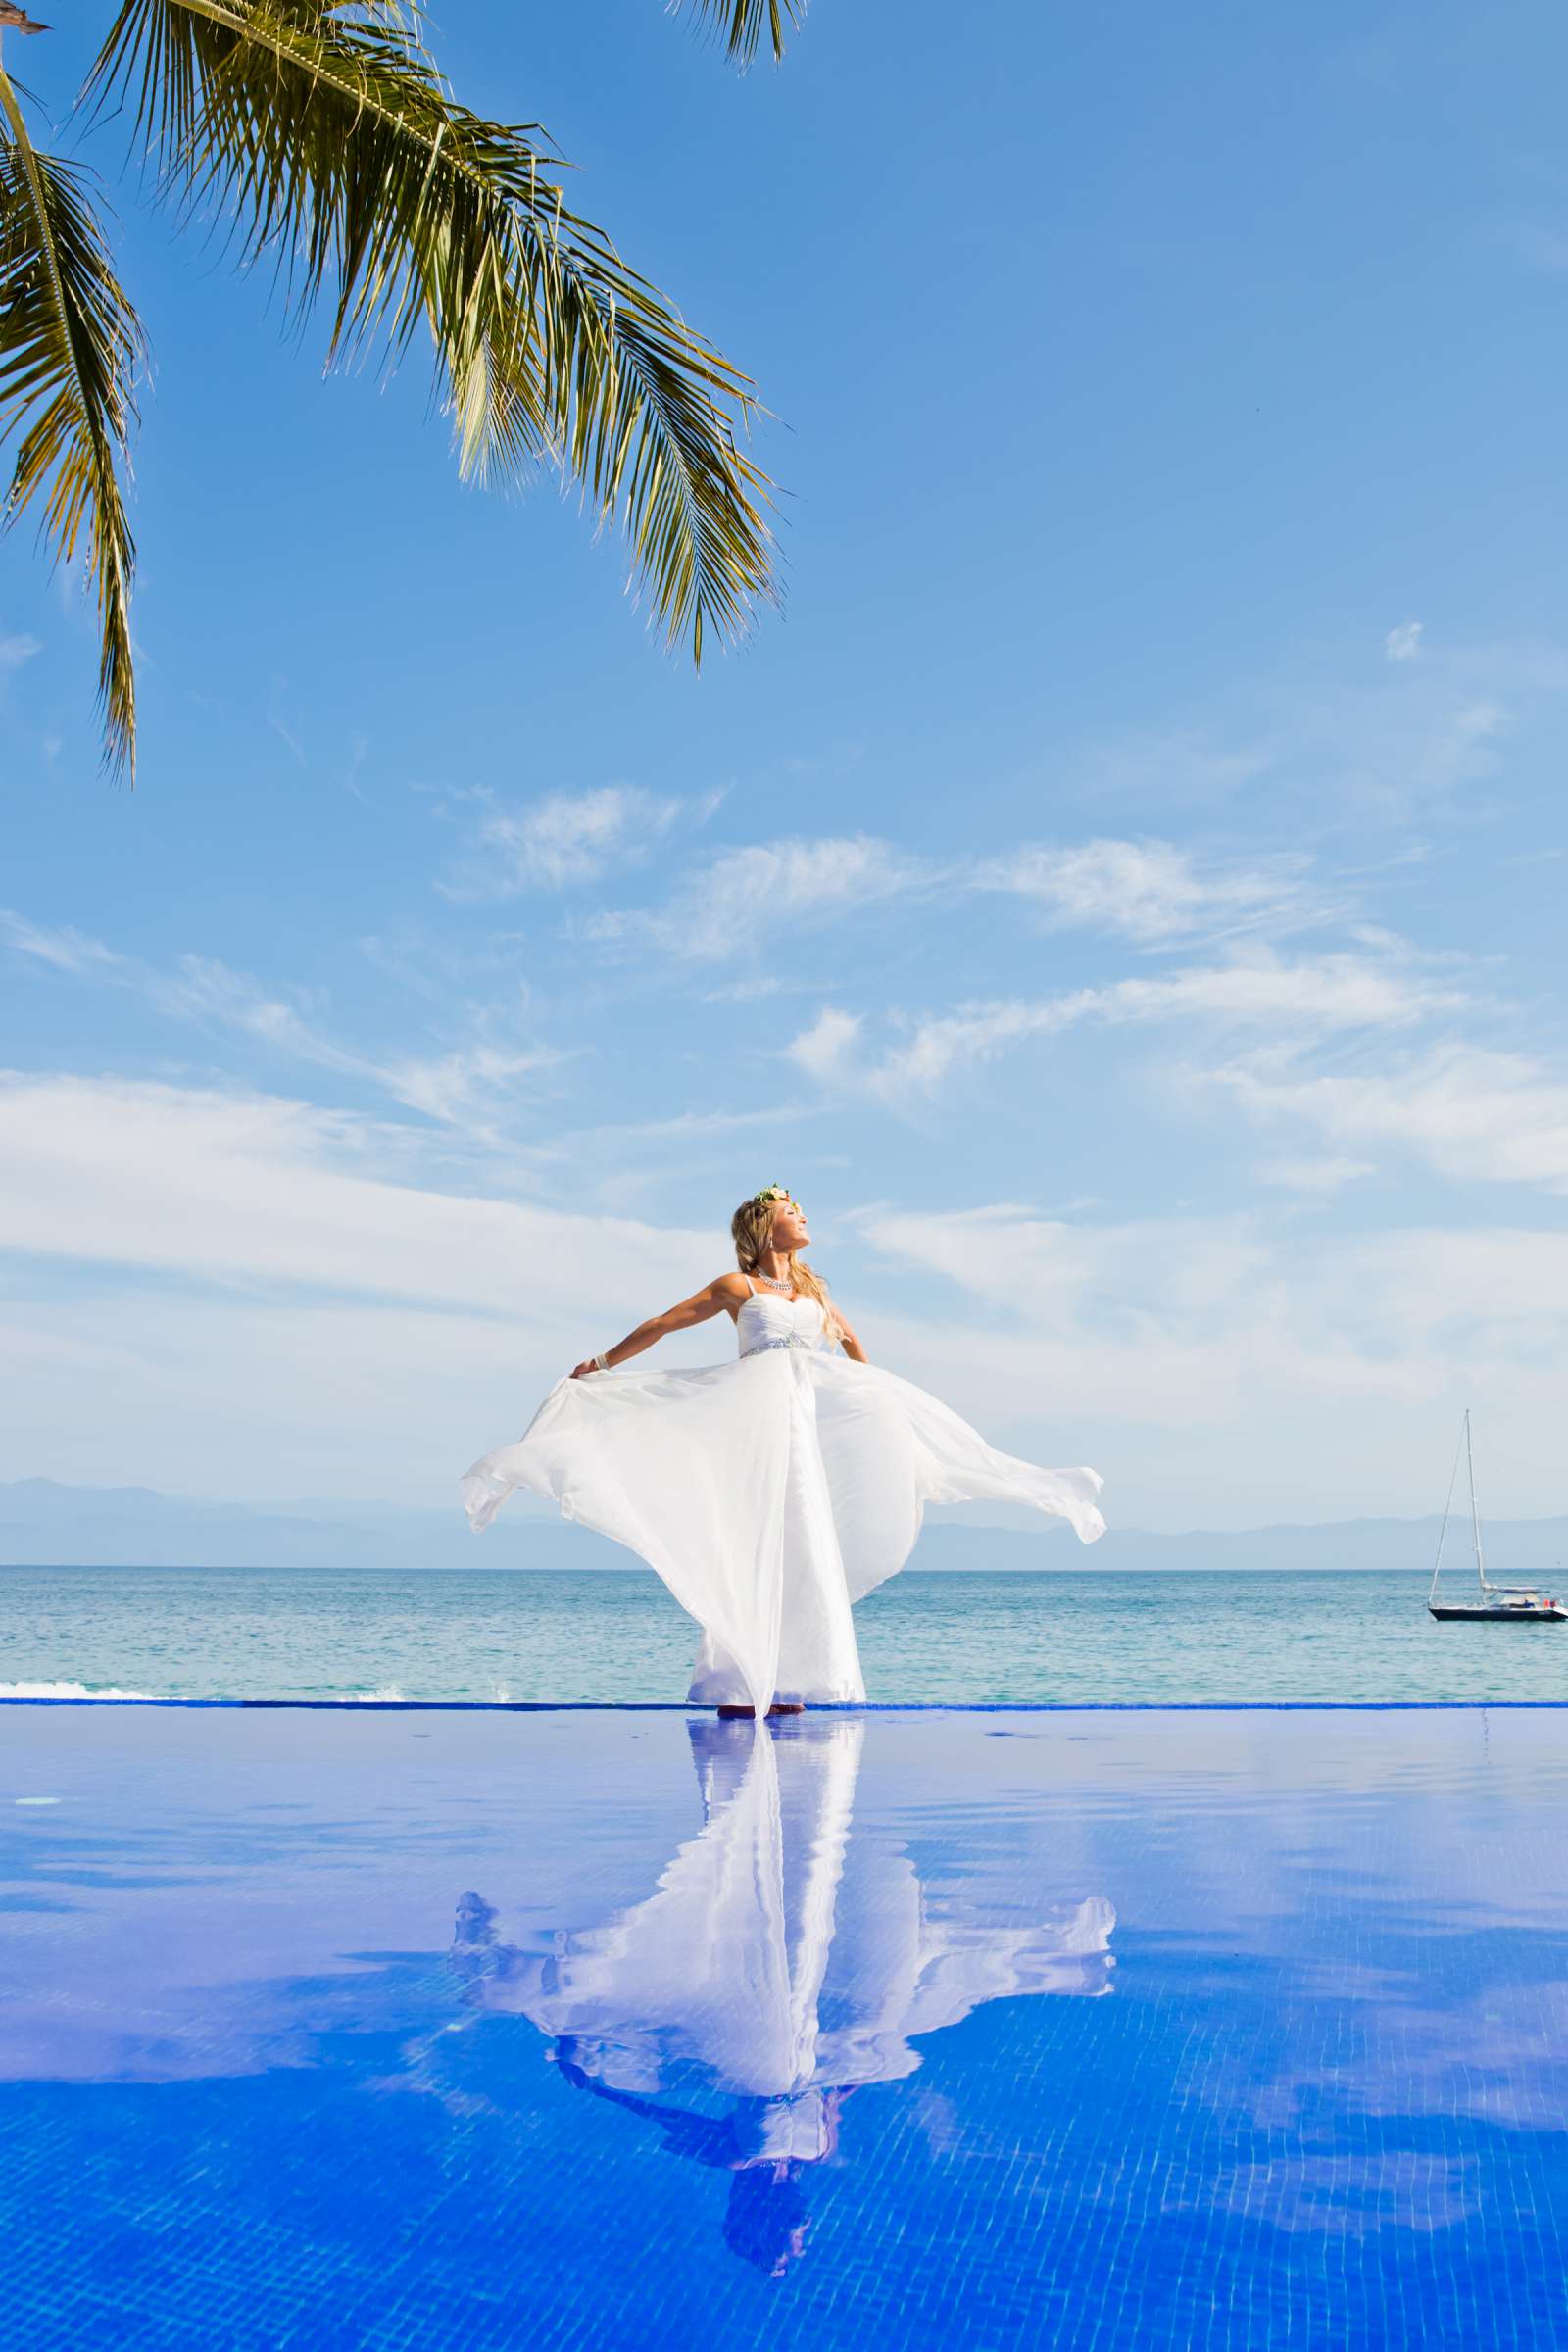 Blue colors, Artsy moment, Fashion, Beach, Reflection, Bride, Photographers Favorite at Exclusive Resorts Punta Mita Wedding, Natalie and Dustin Wedding Photo #1 by True Photography